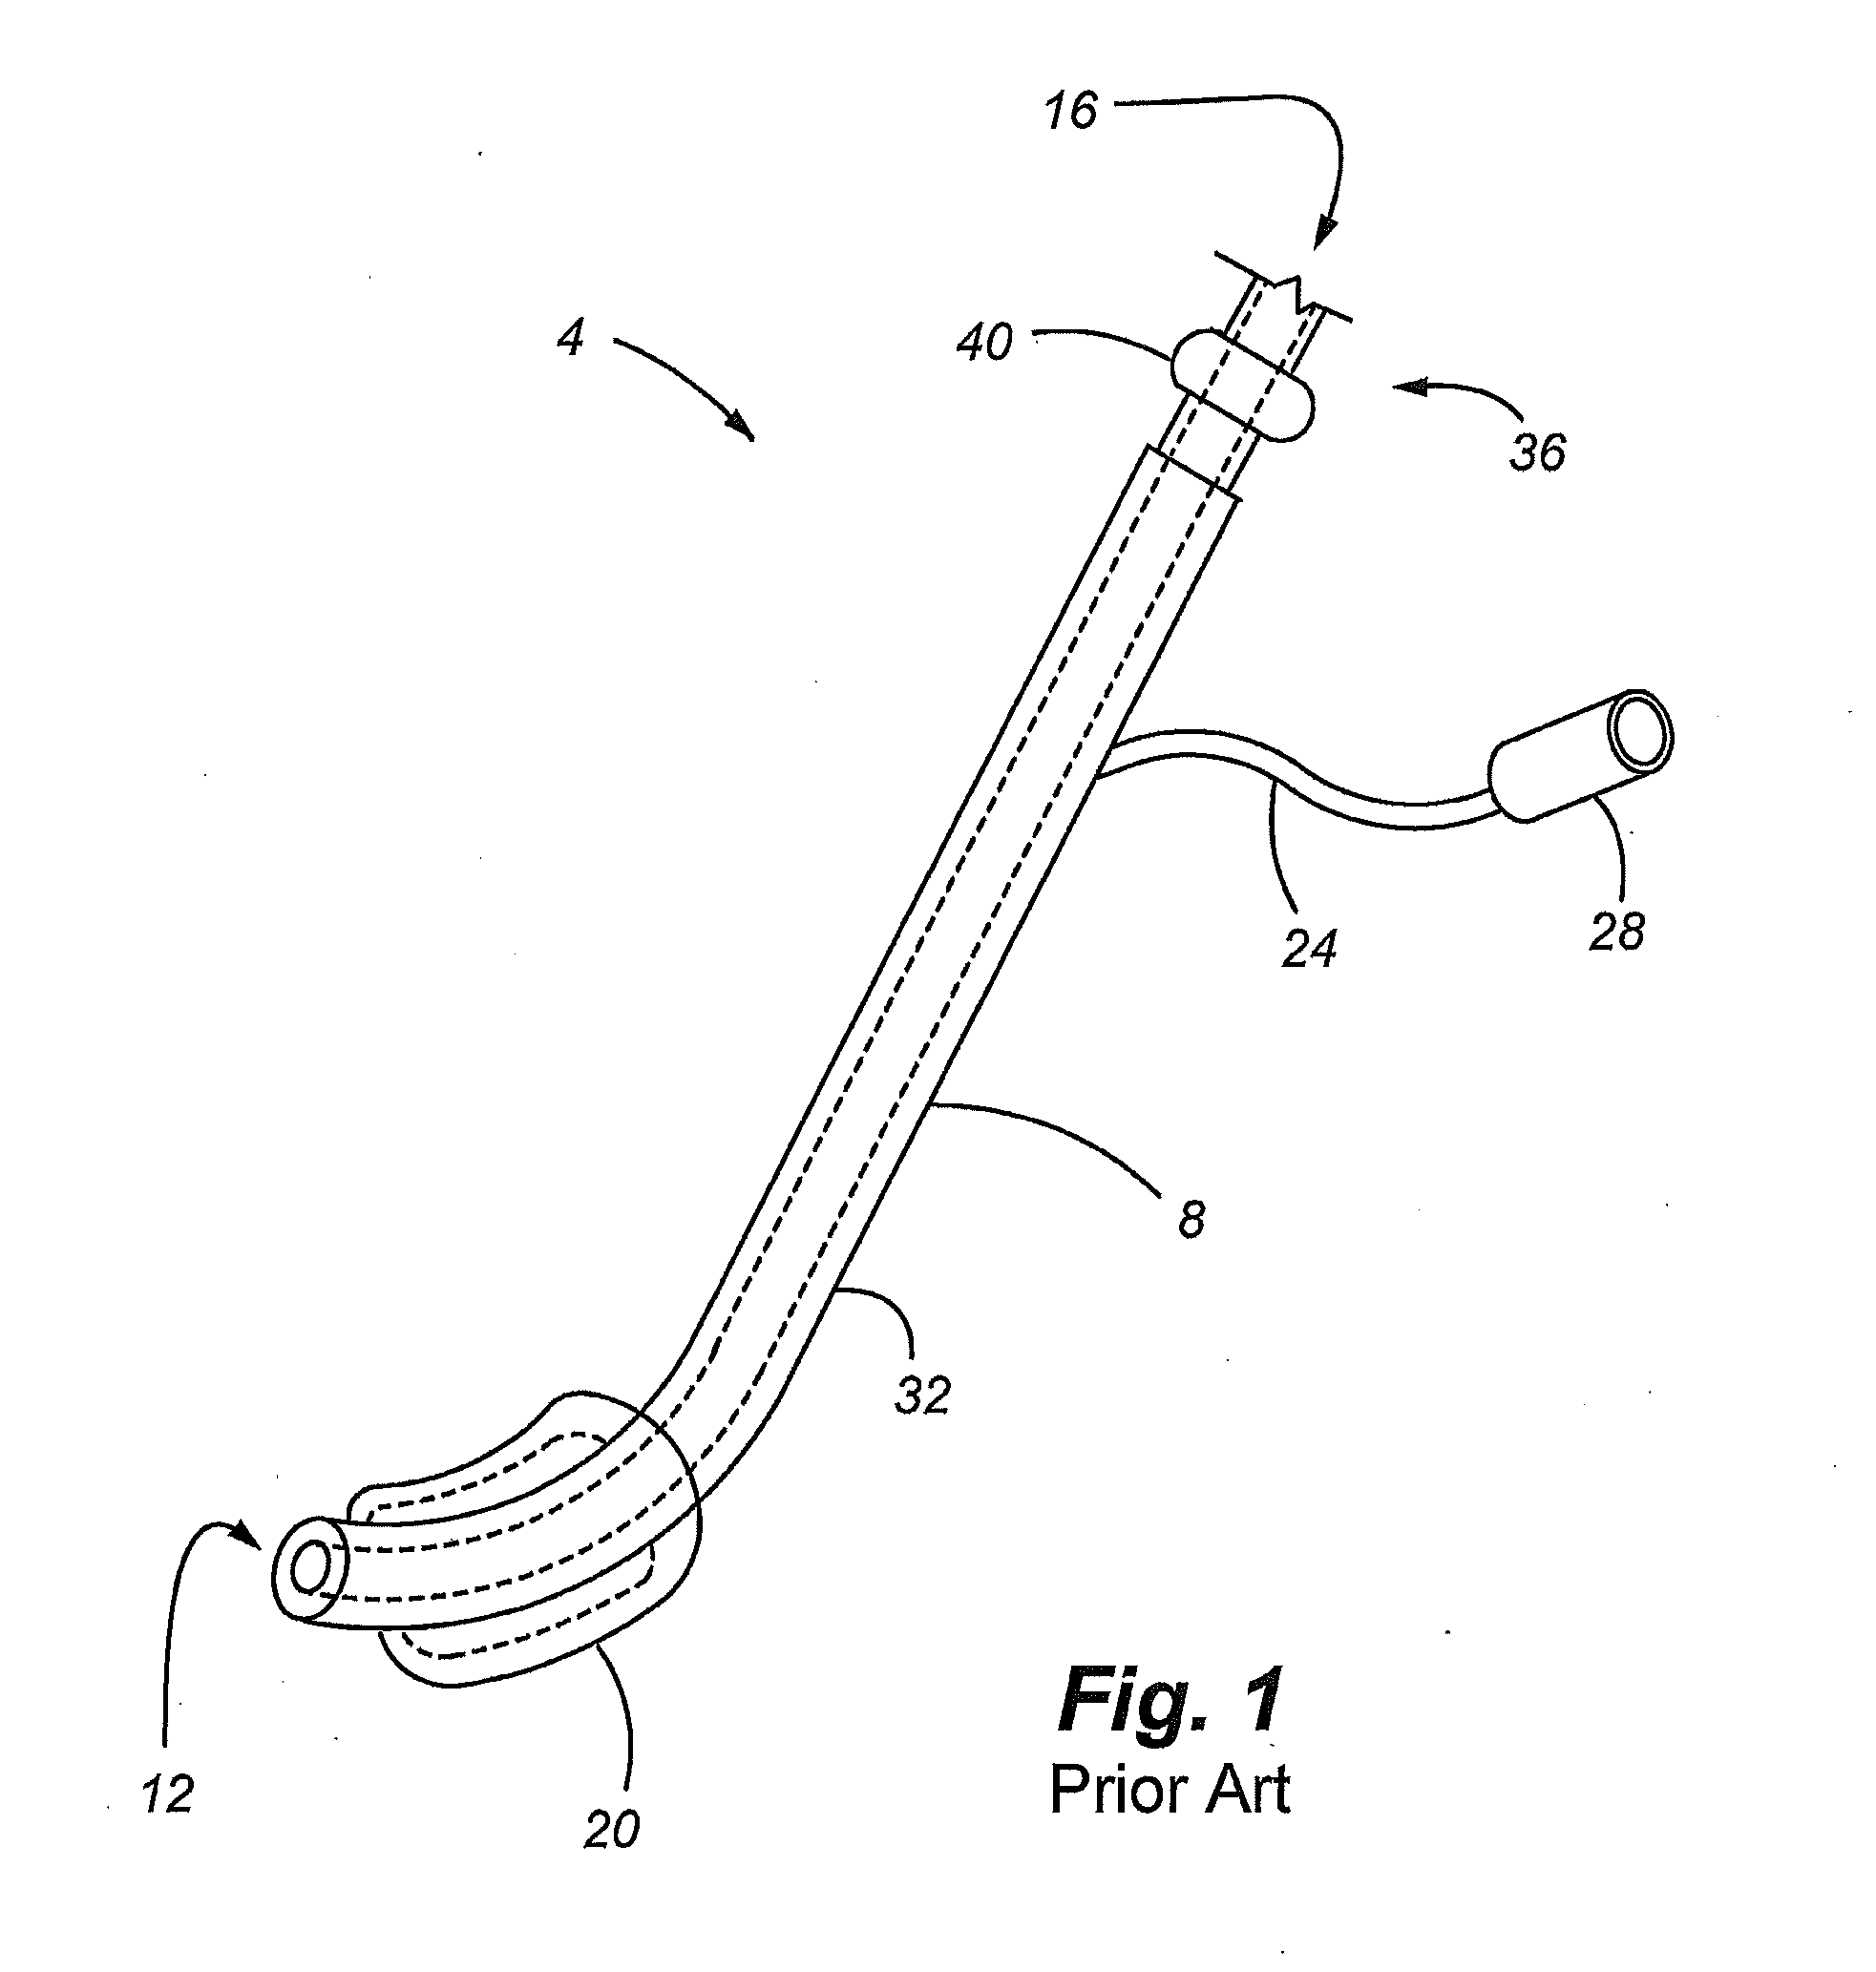 Self-cleaning wireless video stylet with display mounted to laryngoscope blade and method for using the same